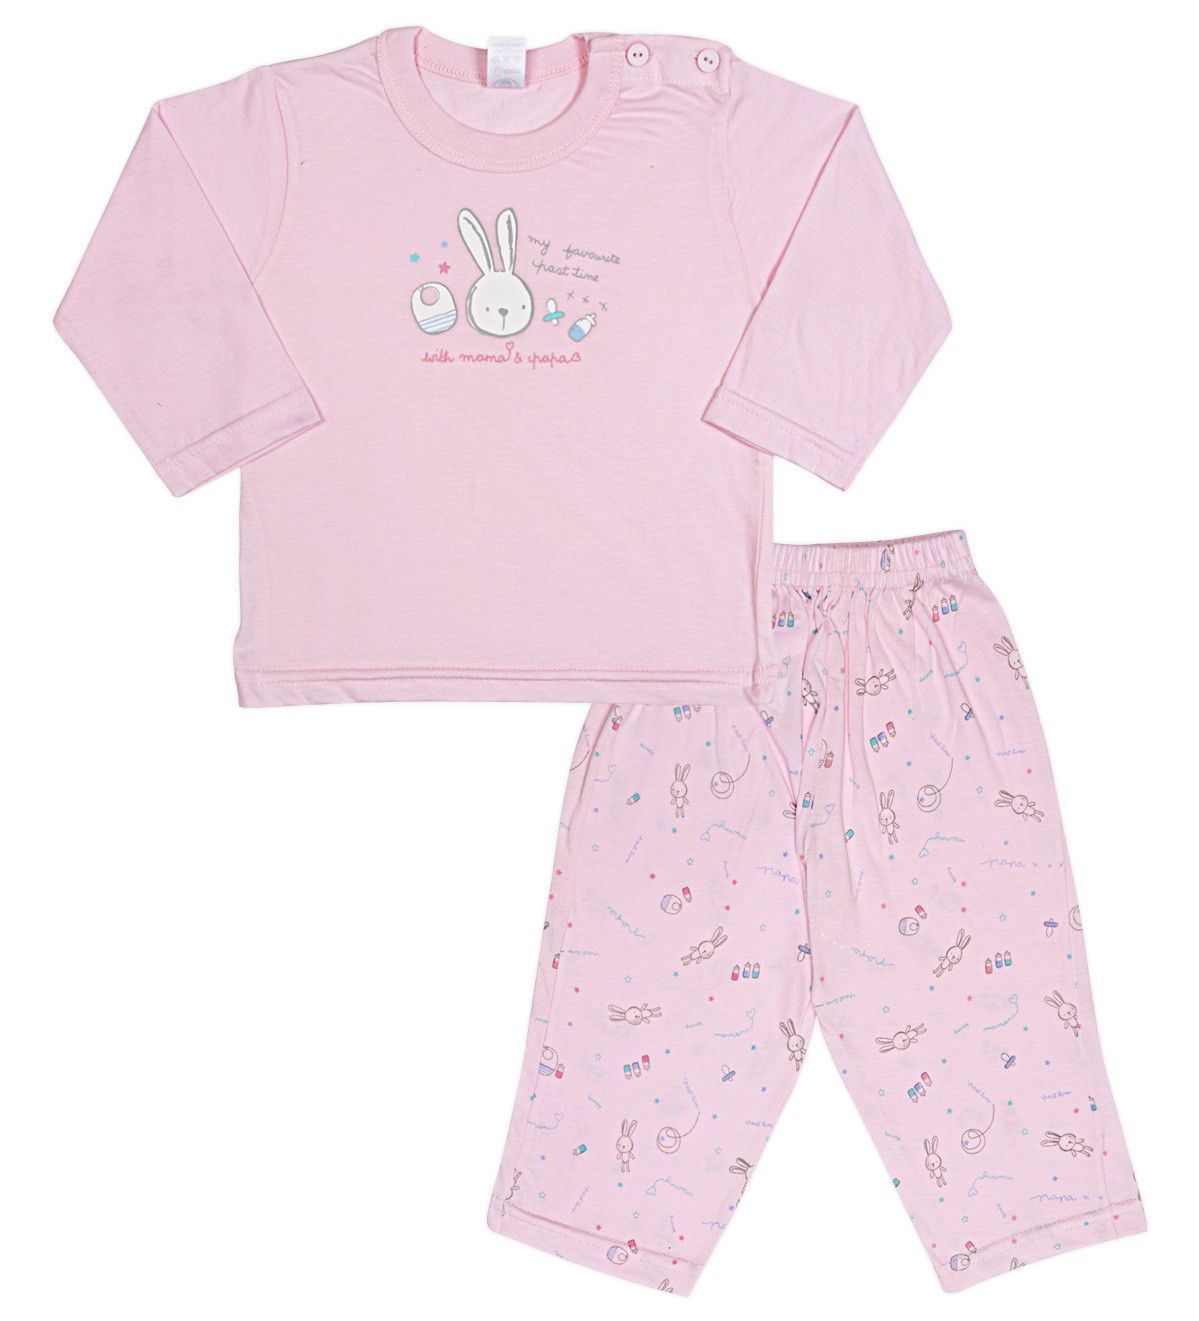 Buy newborn clothes Rupali Square StoreOtherAnnouncementsAll Indiaother